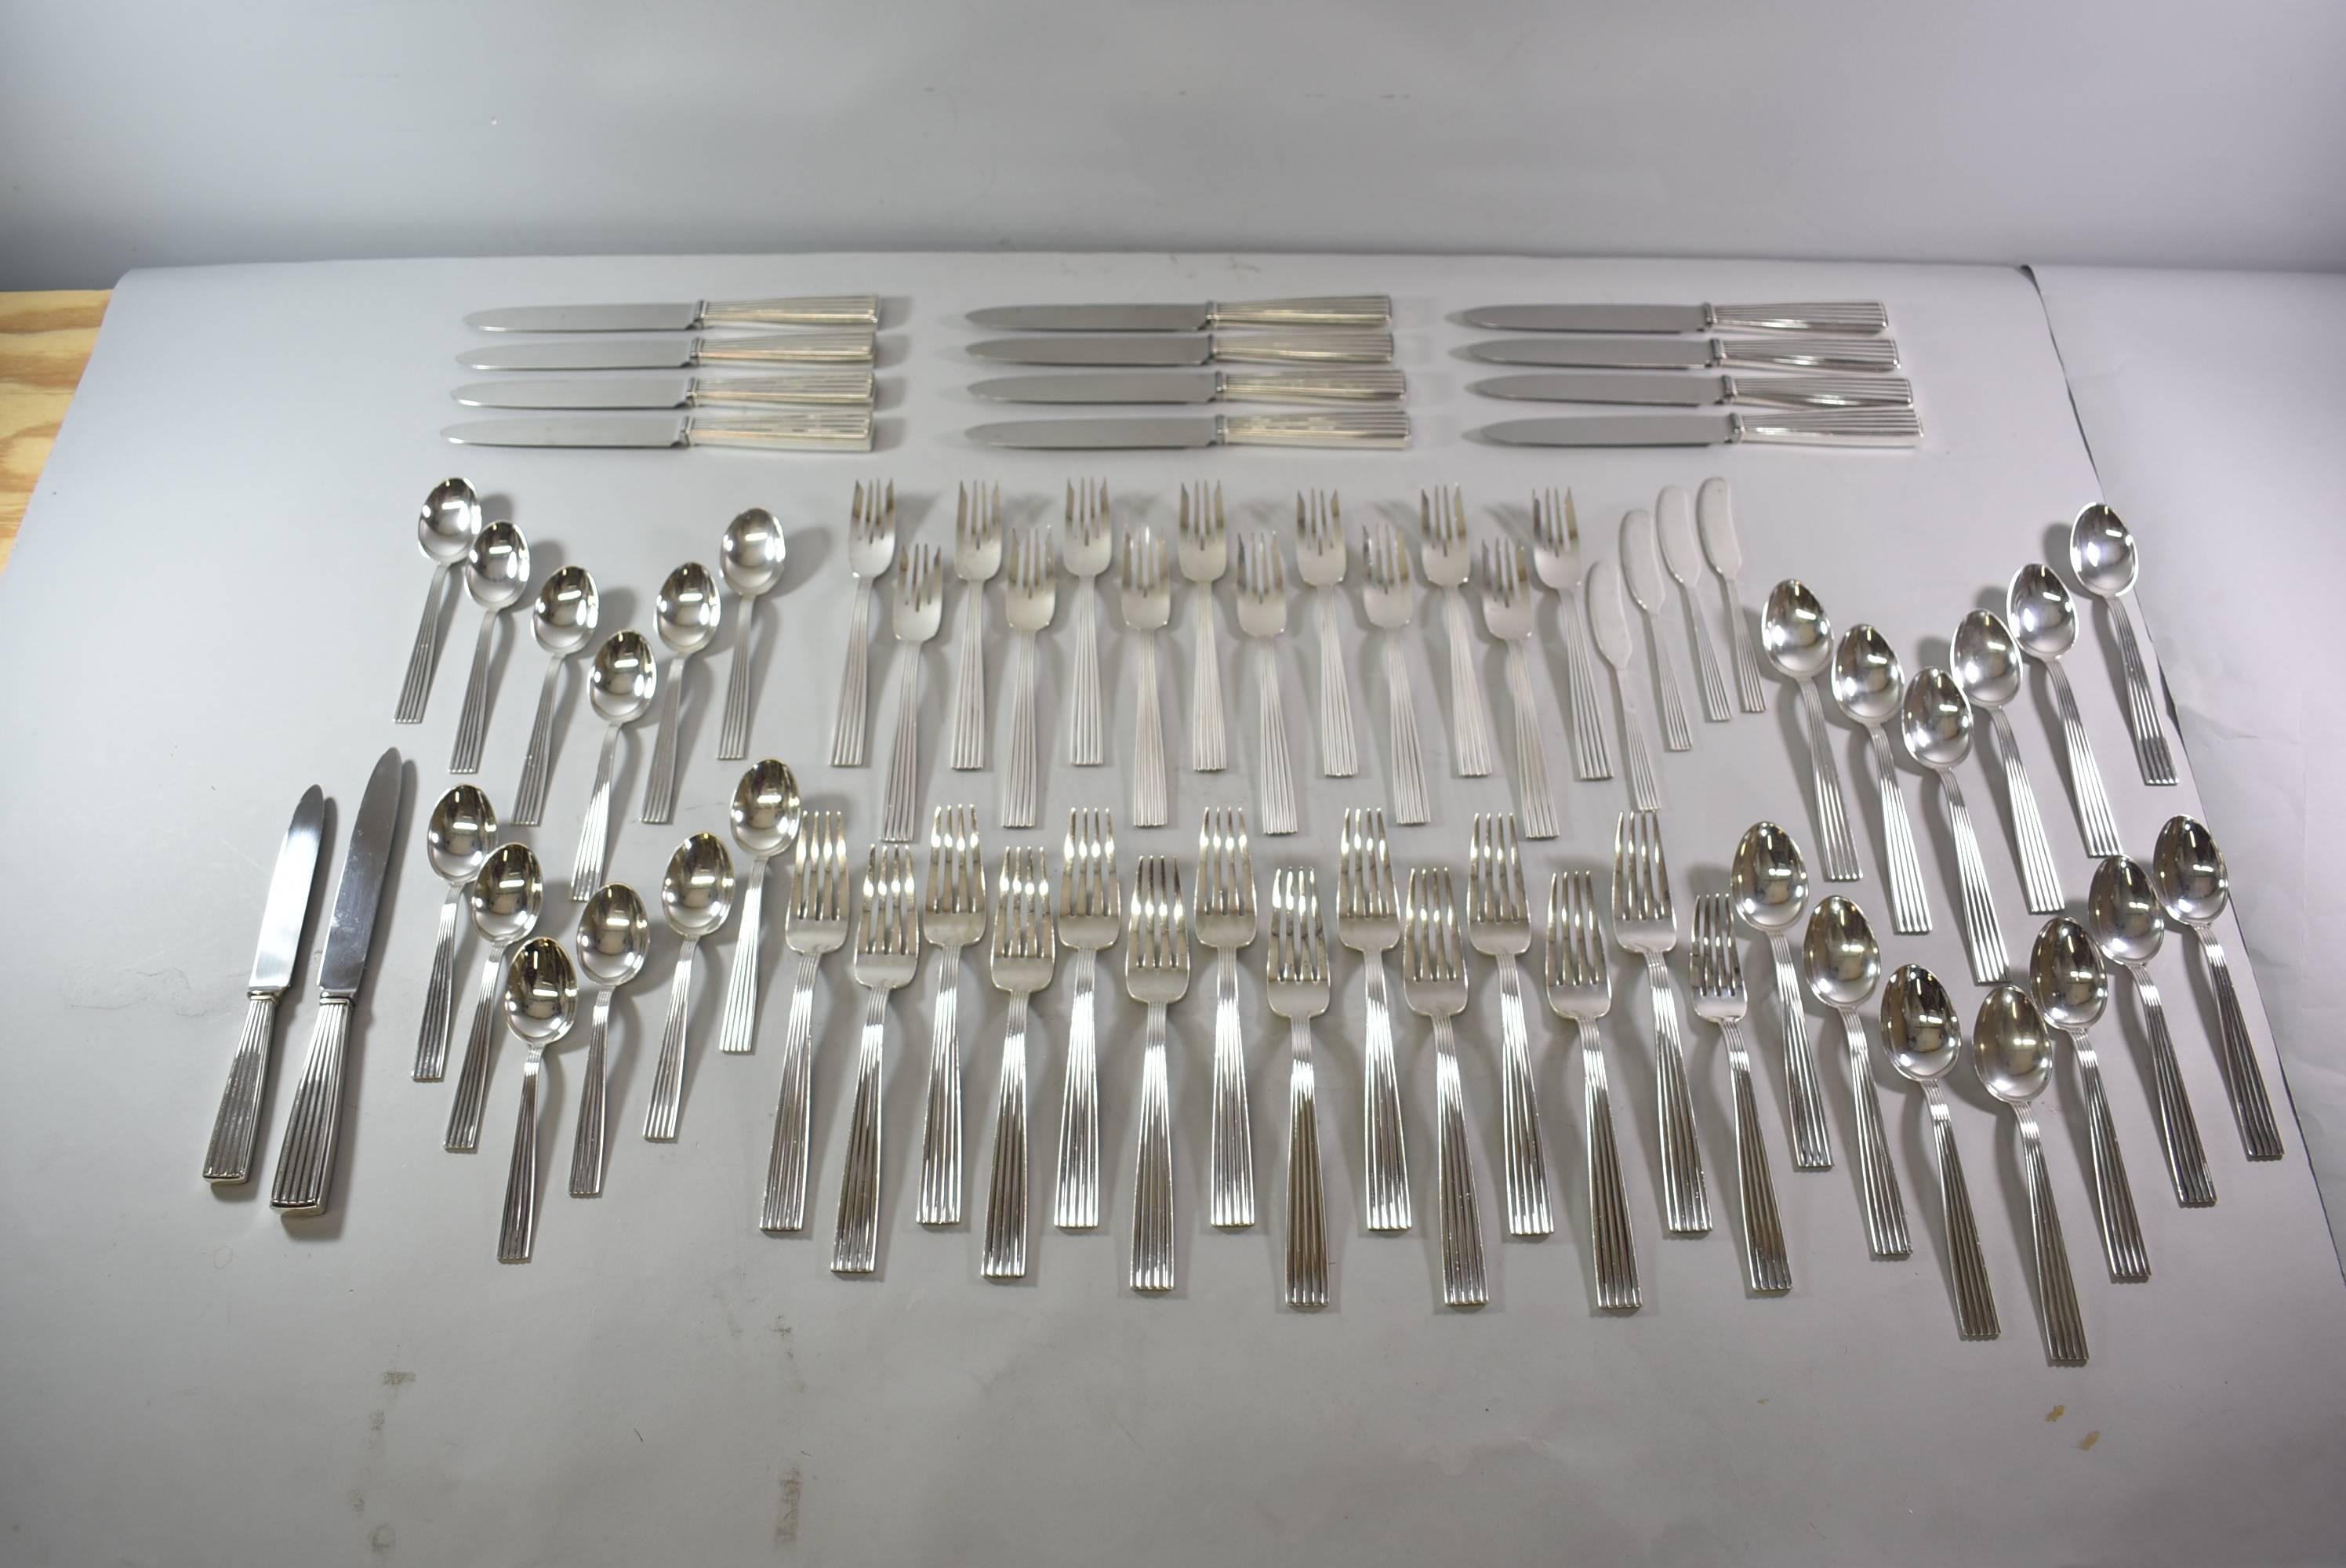 Tiber by Buccellati made in Italy sterling silver flatware set with serving pieces. Included are 70 pieces. 13 dinner knives, 14 dinner forks, 8